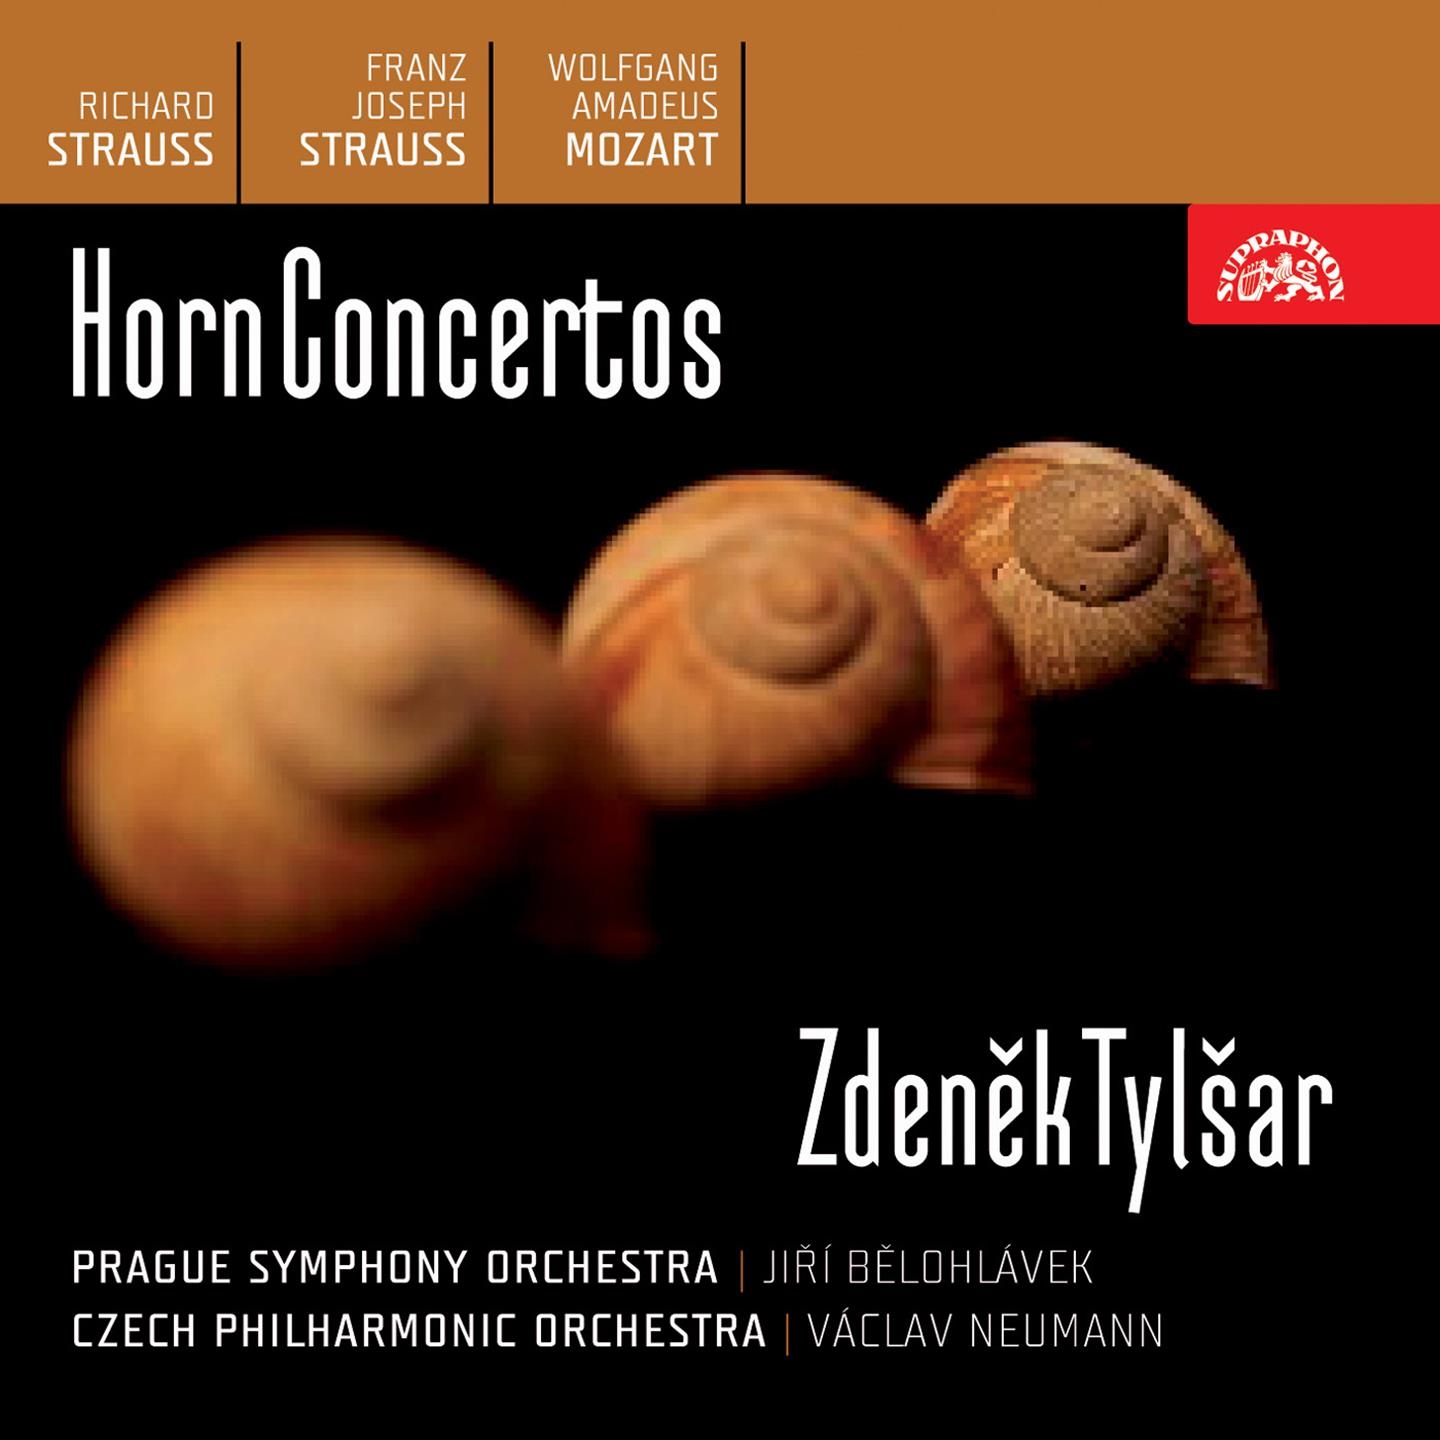 Concerto for French Horn and Orchestra No. 1 in E-Flat Major, Op. 11, .: III. Allegro /att./